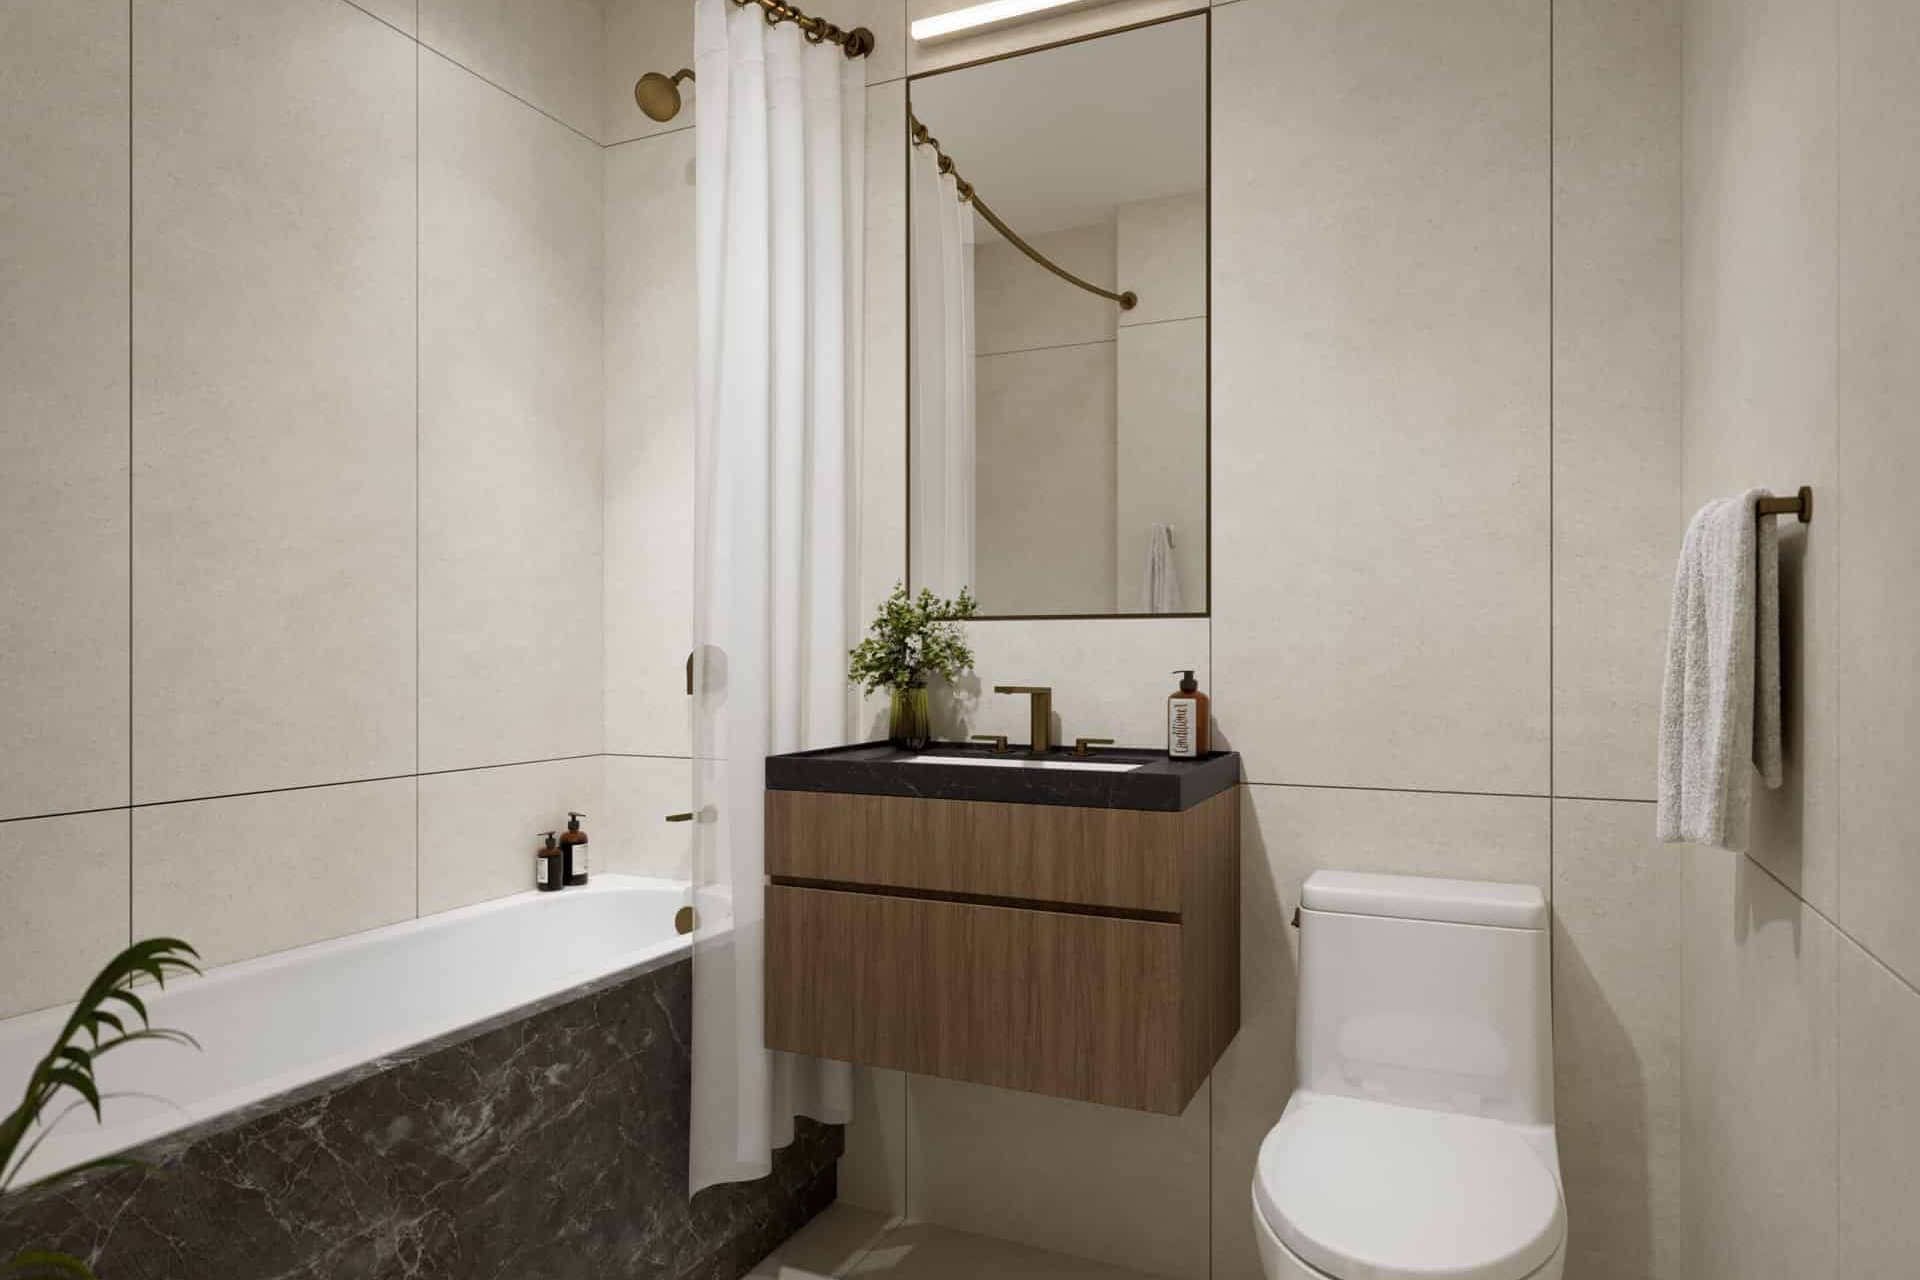 Bathroom at 231 East 76th Street apartment with tile walls, single vanity, a rectangle mirror and soaking tub with shower.